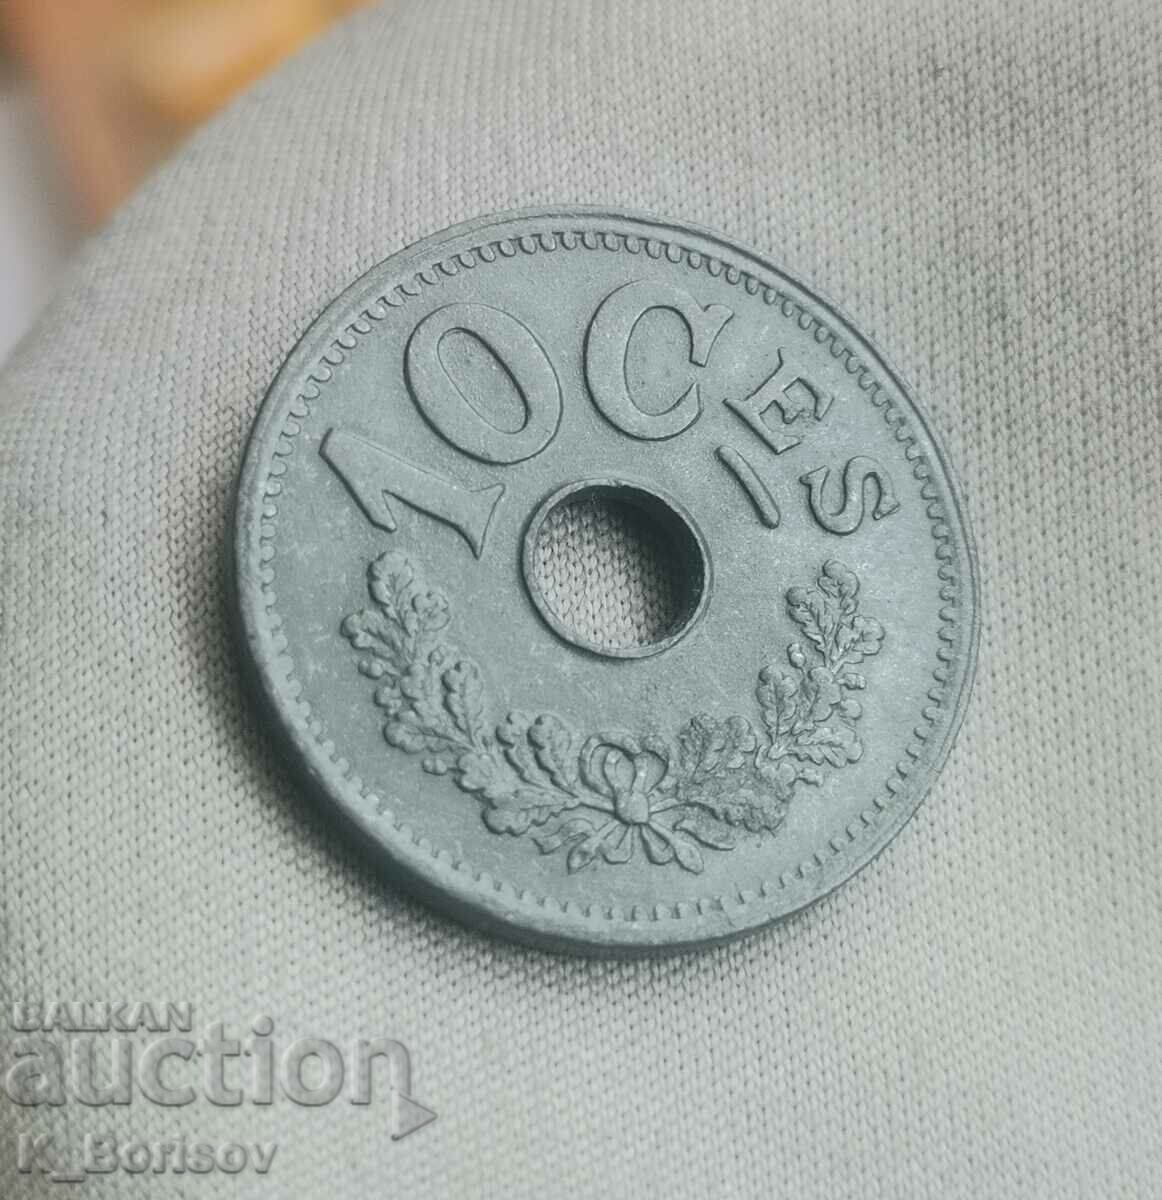 Luxembourg 10 centimes 1915